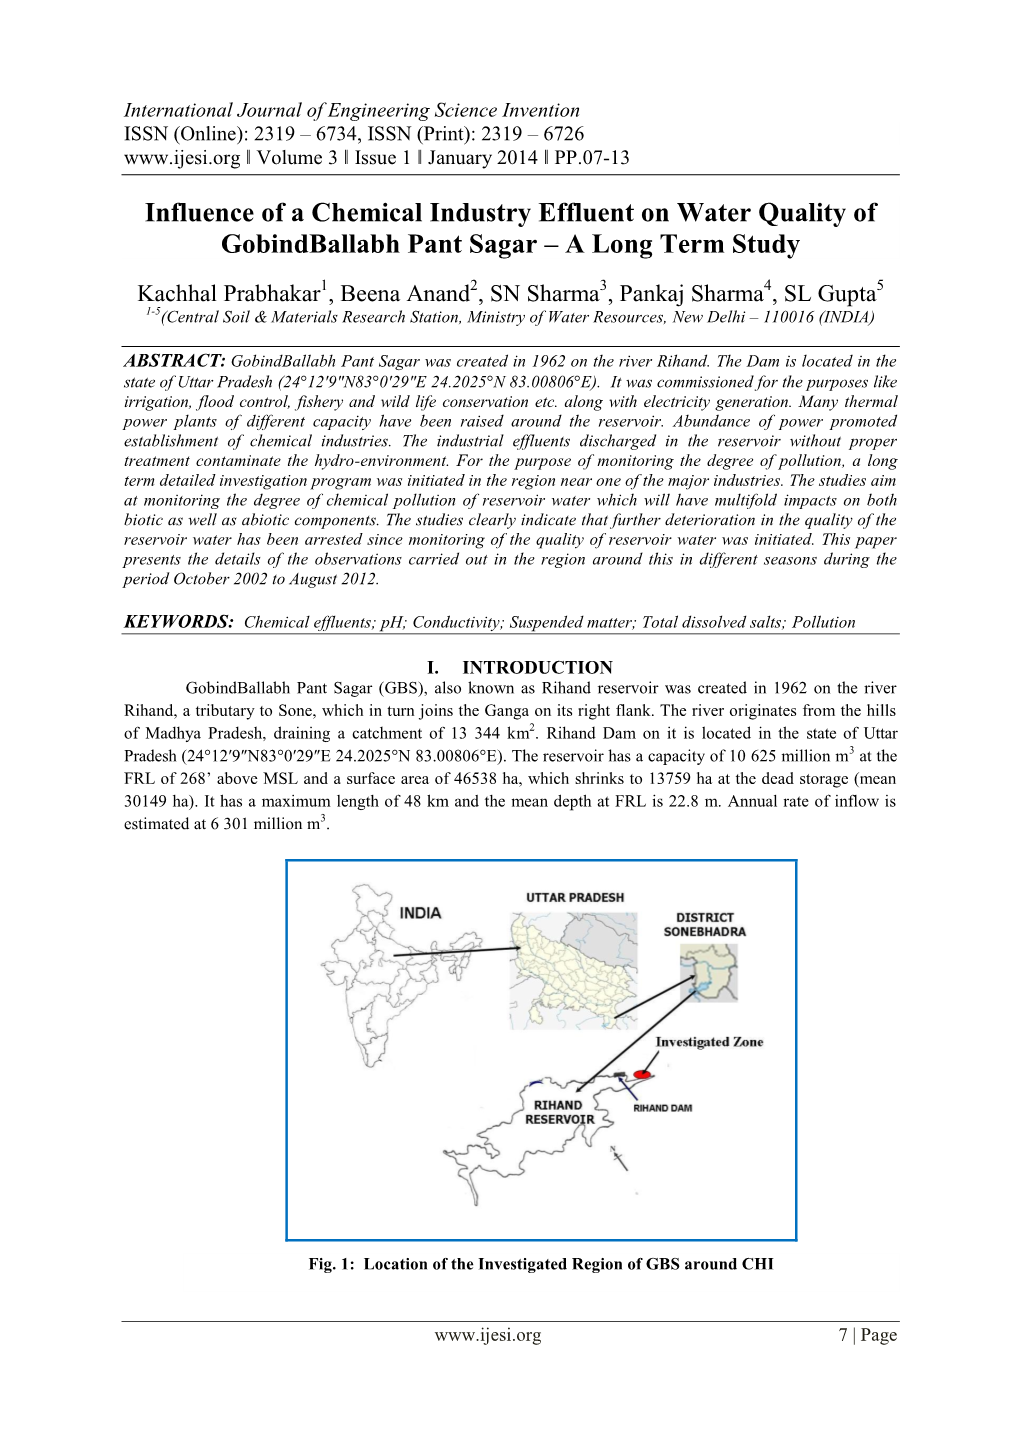 Influence of a Chemical Industry Effluent on Water Quality of Gobindballabh Pant Sagar – a Long Term Study